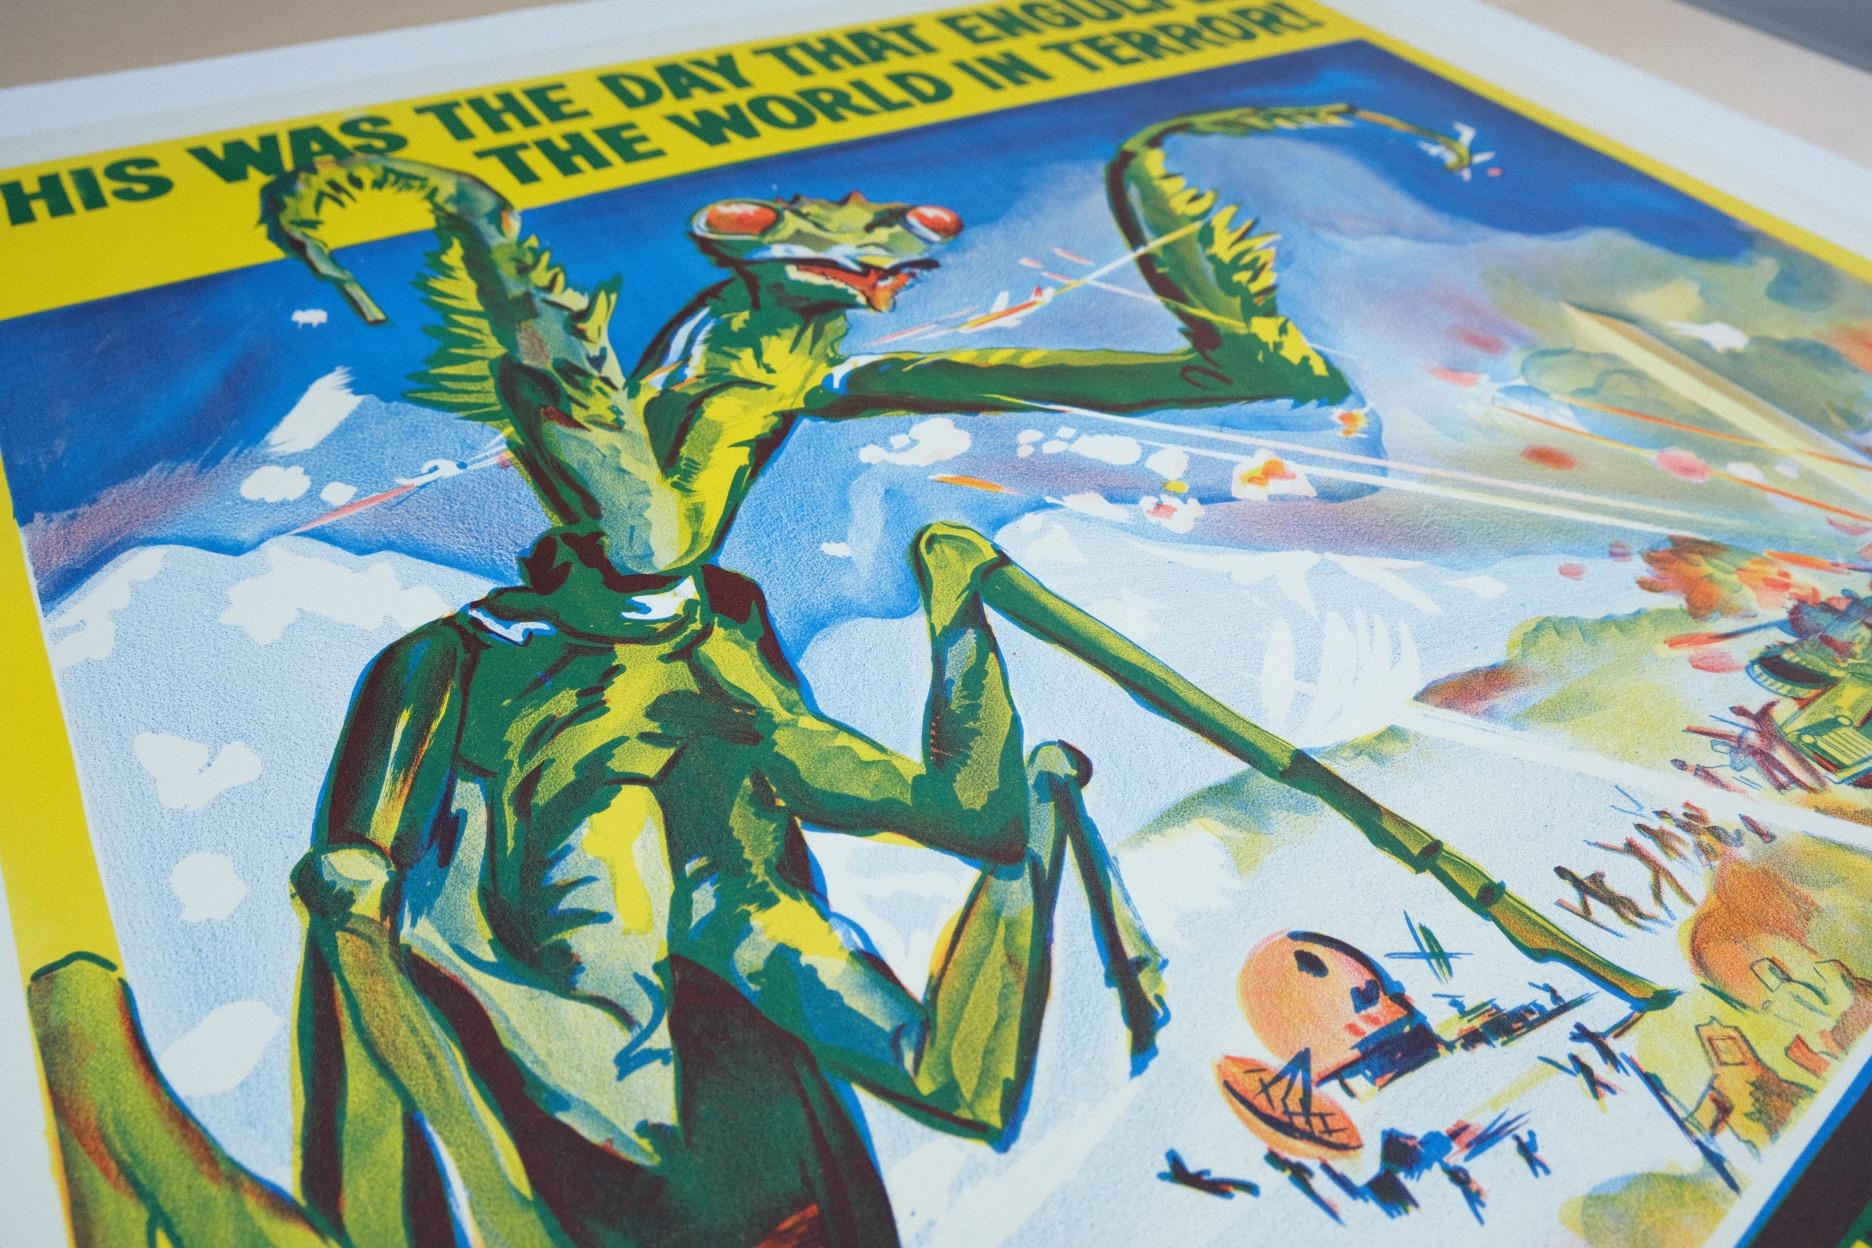 Size: One-Sheet

Condition: Mint

Dimensions: 1150mm x 780mm (inc. Linen Border)

Type: Original Lithographic Print - Linen Backed

Year: 1957

Details: A rare original poster for the classic 1957 Sci-Fi film ‘The Deadly Mantis’. This